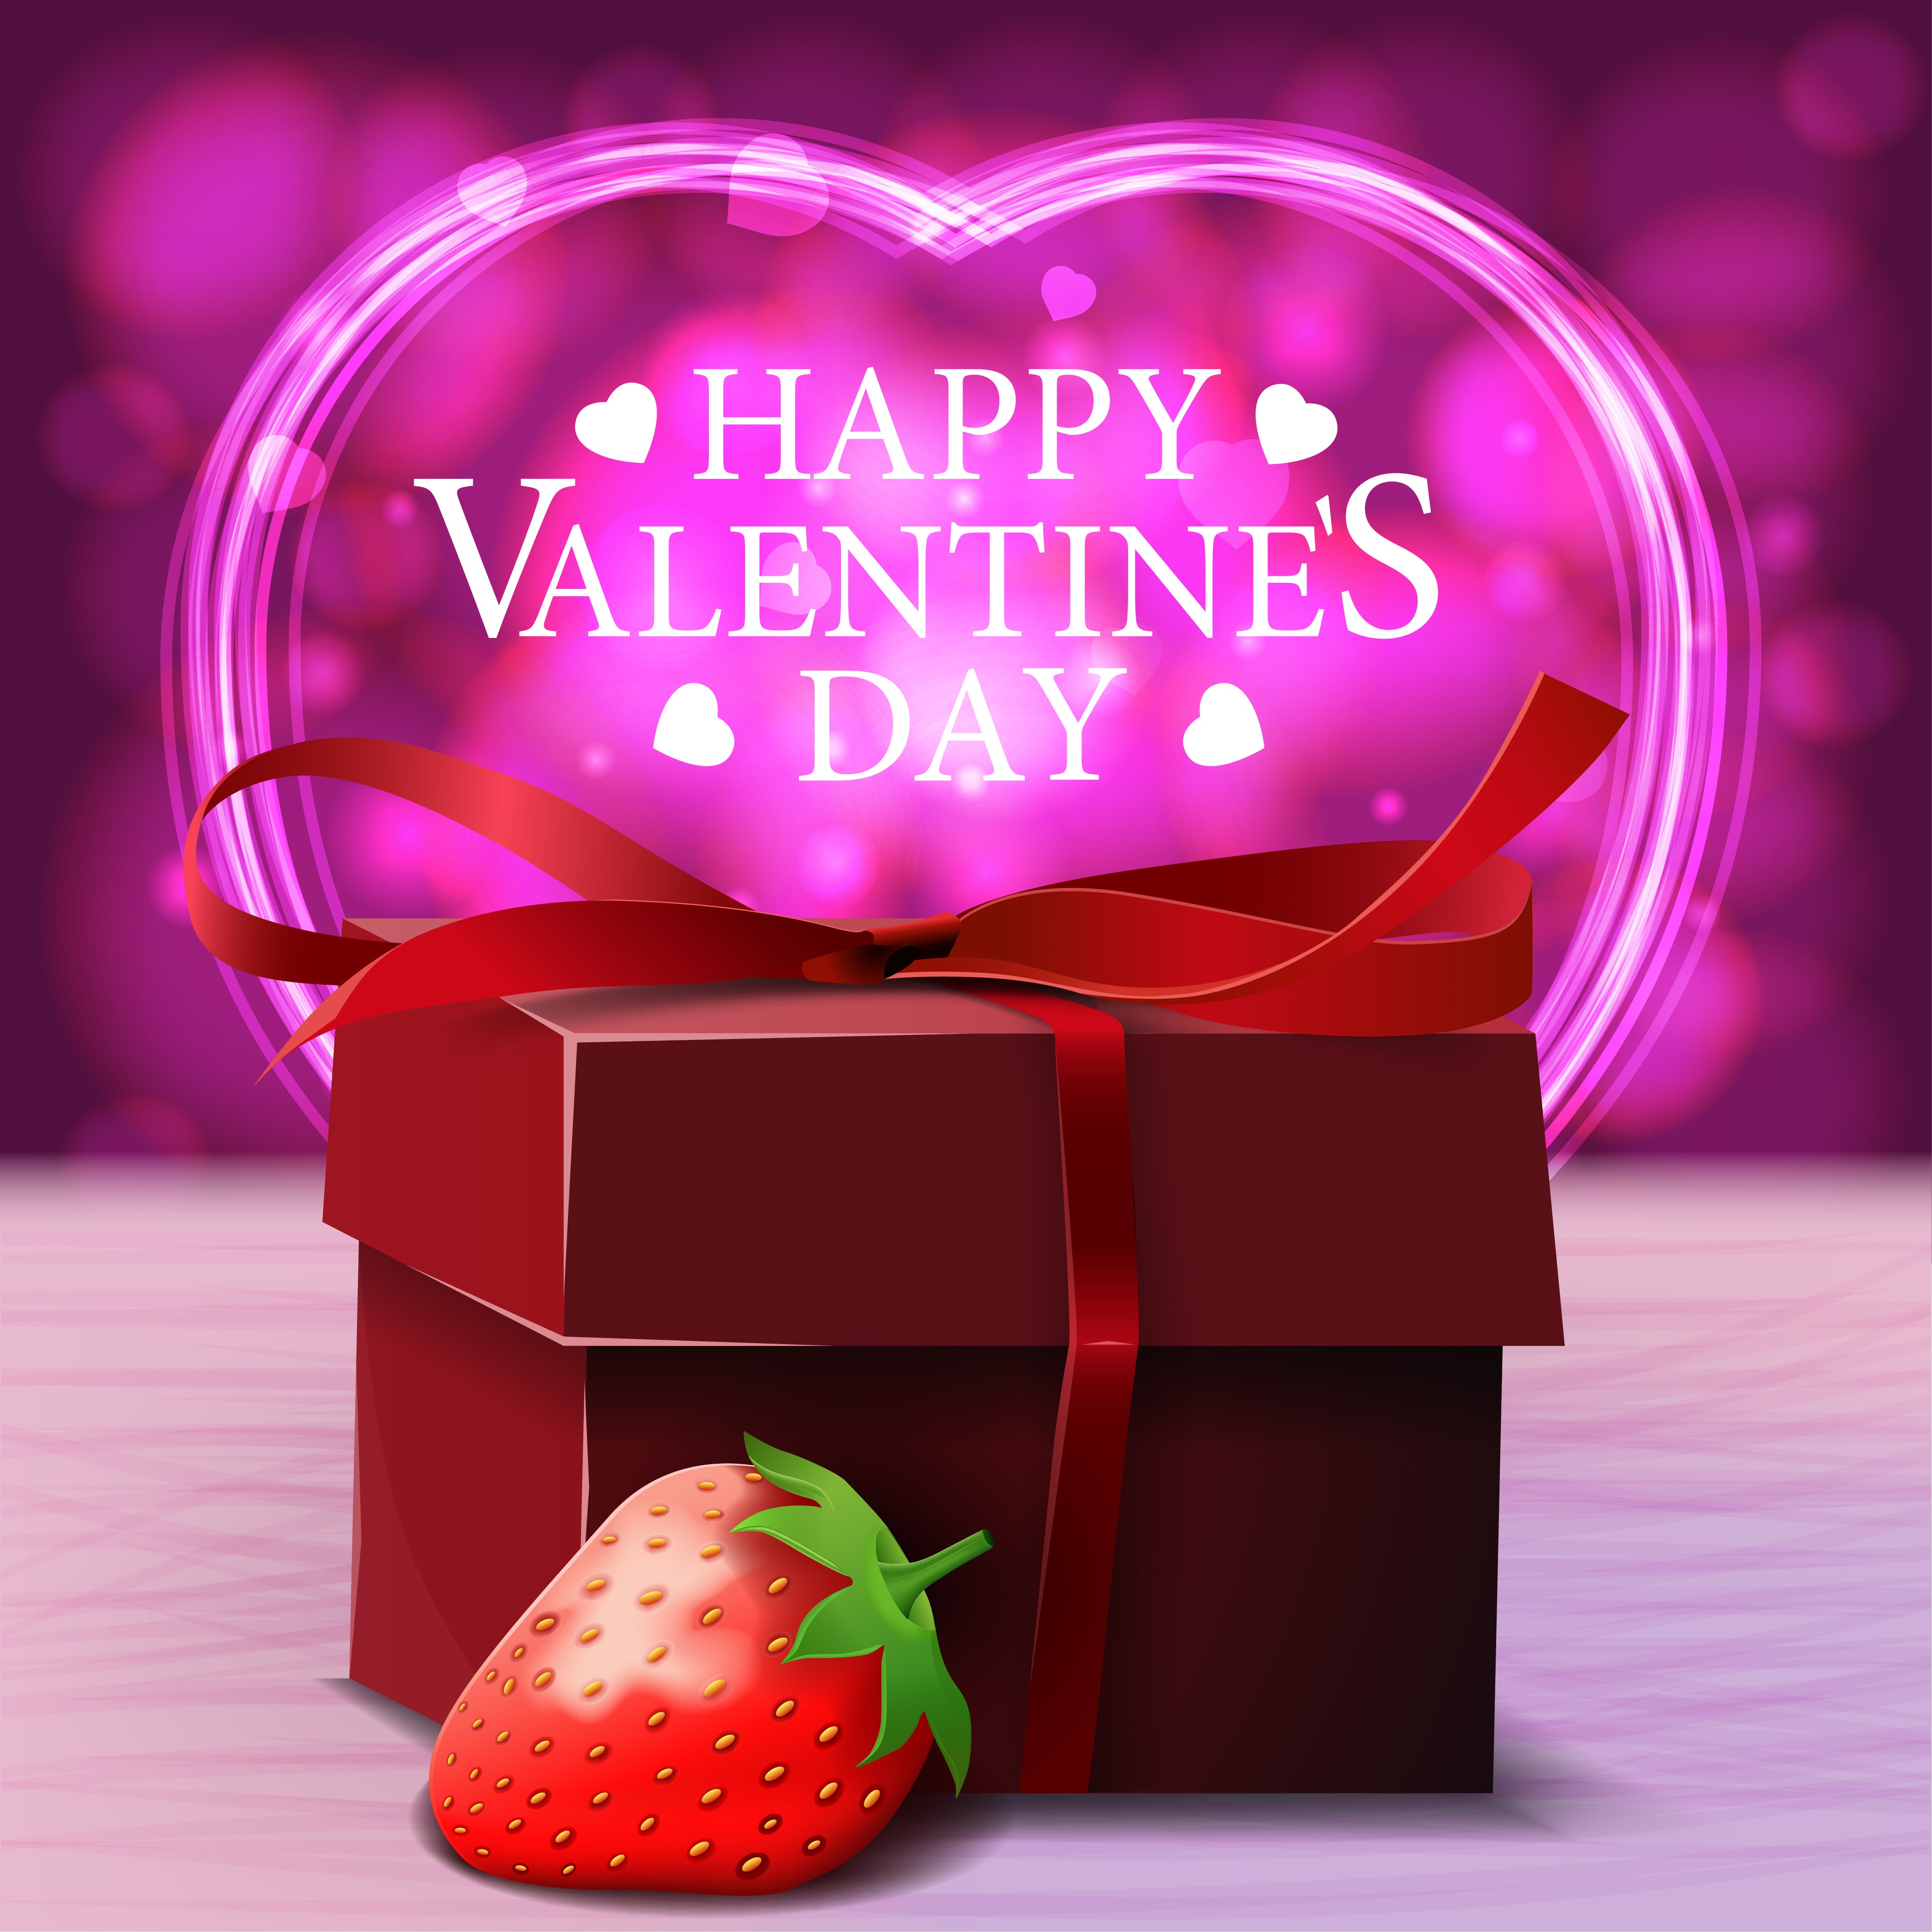 4K, Valentine's Day, Strawberry, Word, English, Gifts, Heart Gallery HD Wallpaper